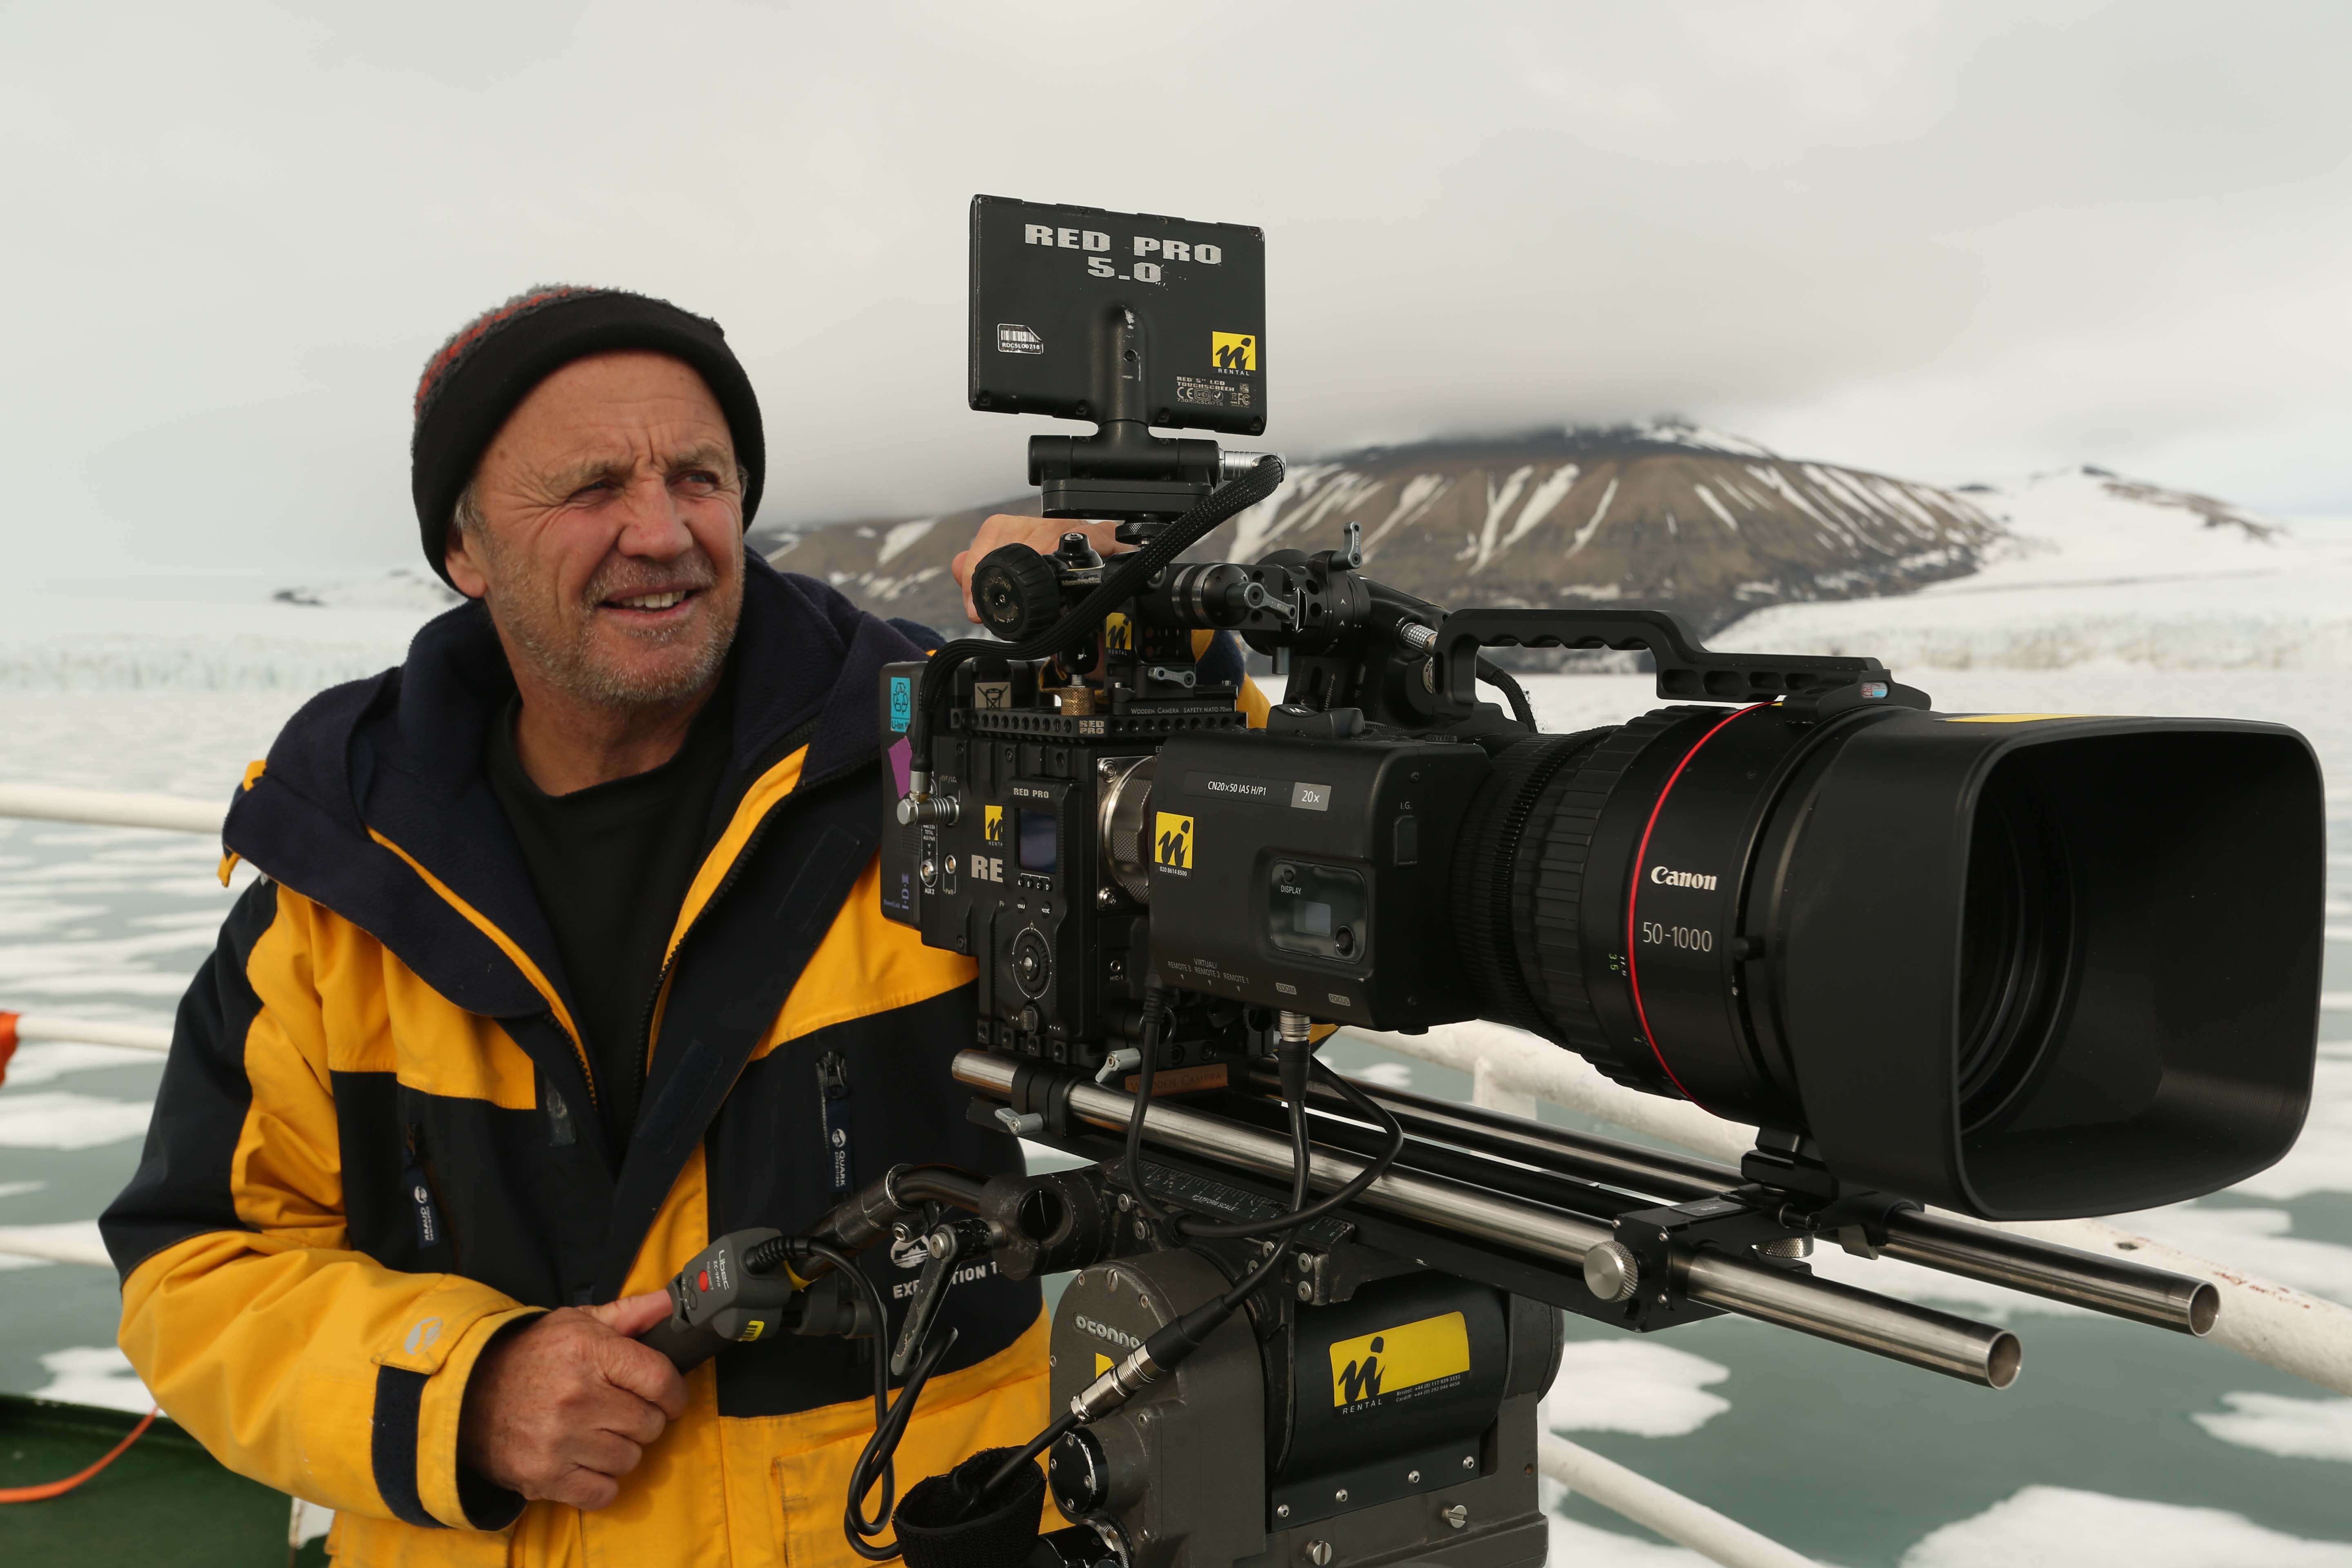 Doug_filming_with_his_RED_9A5A510_22_26dzu9.j...